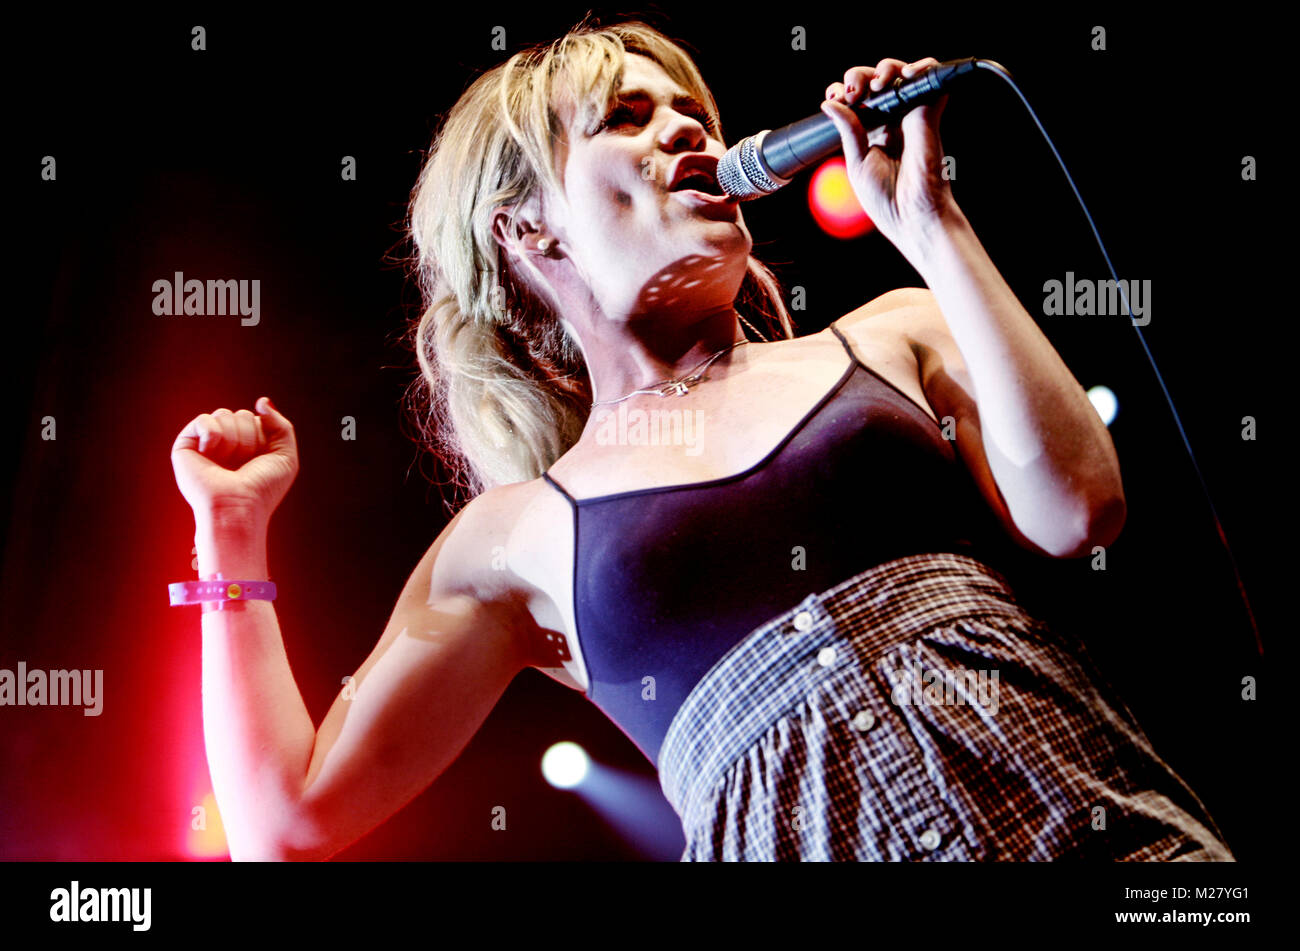 patron Jeg spiser morgenmad grøntsager The Welsh singer and songwriter Amie Ann Duffy is best known as Duffy and  here pictured at a live concert at the Danish music festival Roskilde  Festival 2008. Denmark, 03/07 2014 Stock Photo - Alamy